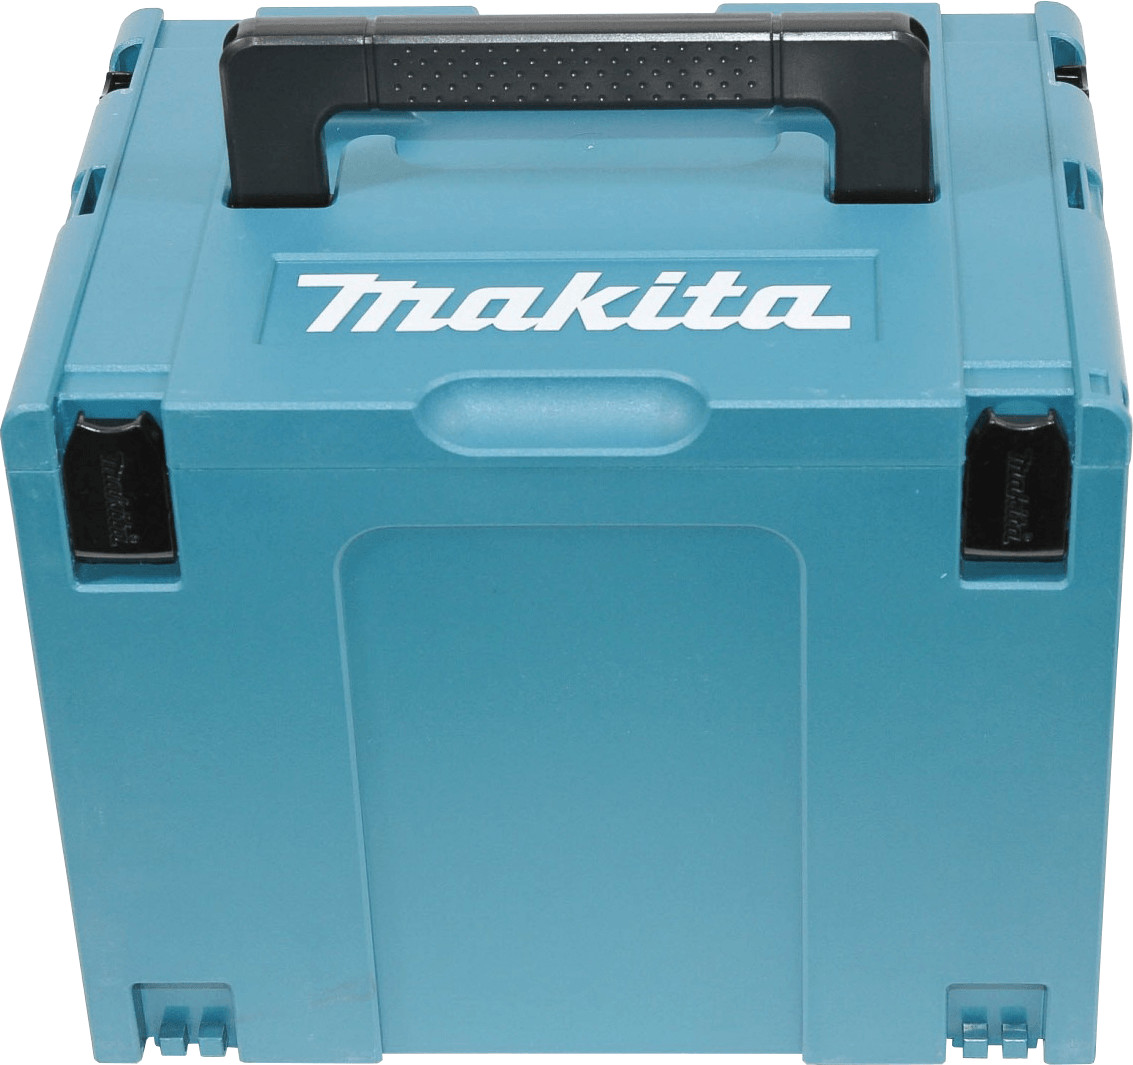 Coffret empilable robuste Makpac Taille 3 - MAKITA 821551-8